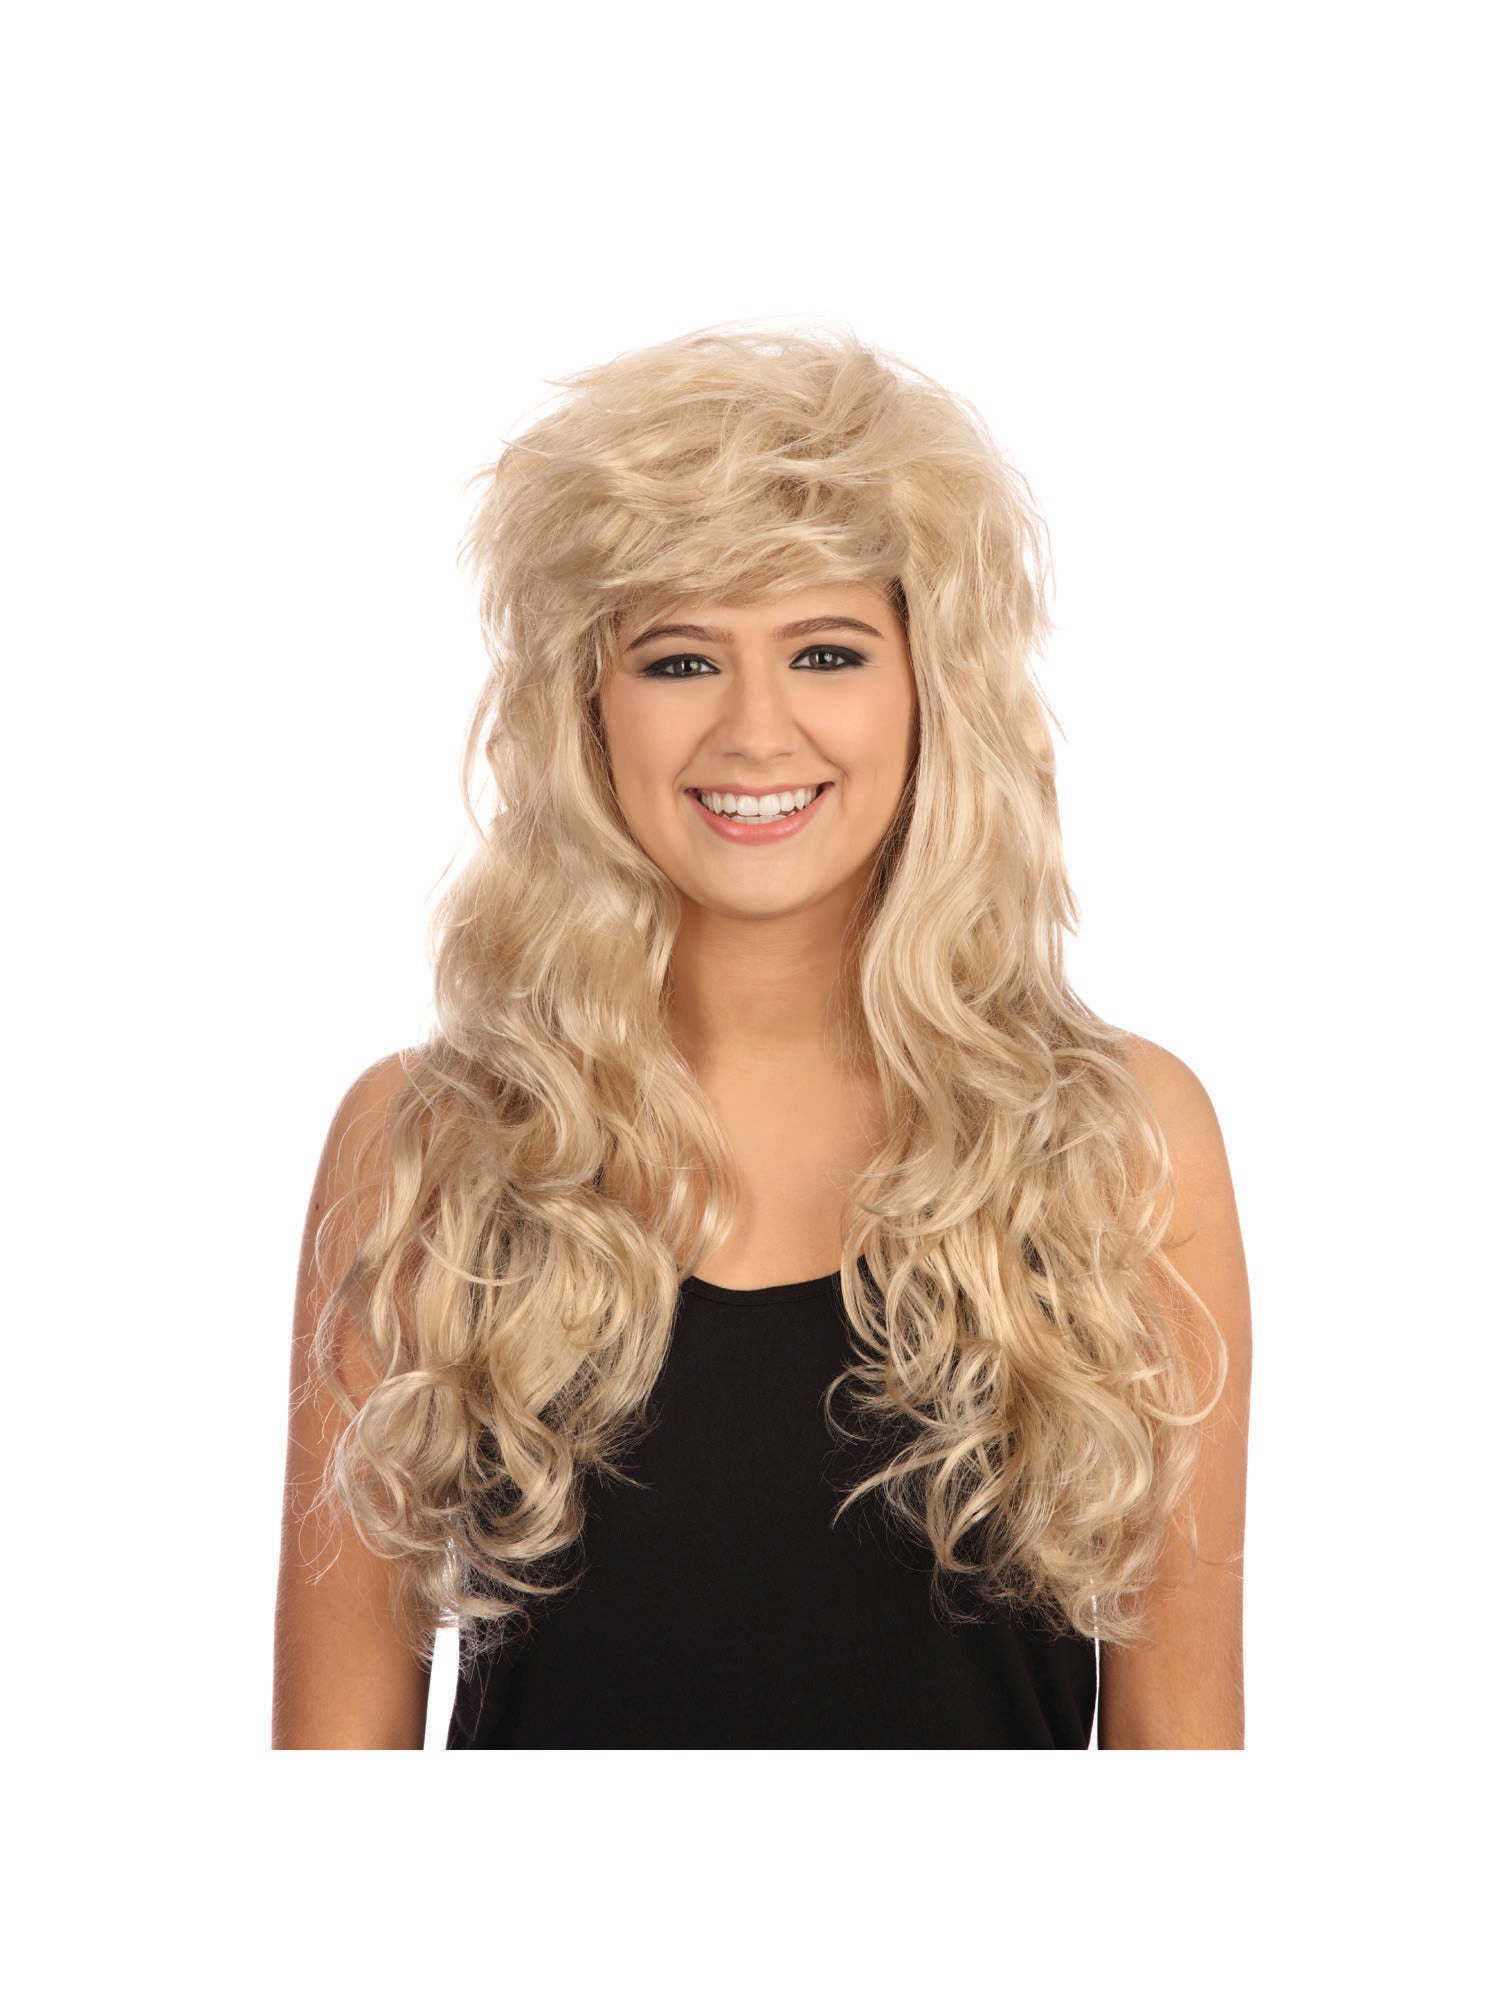 Rock Chick Blonde, Blonde, Generic, Wig, One Size, Front